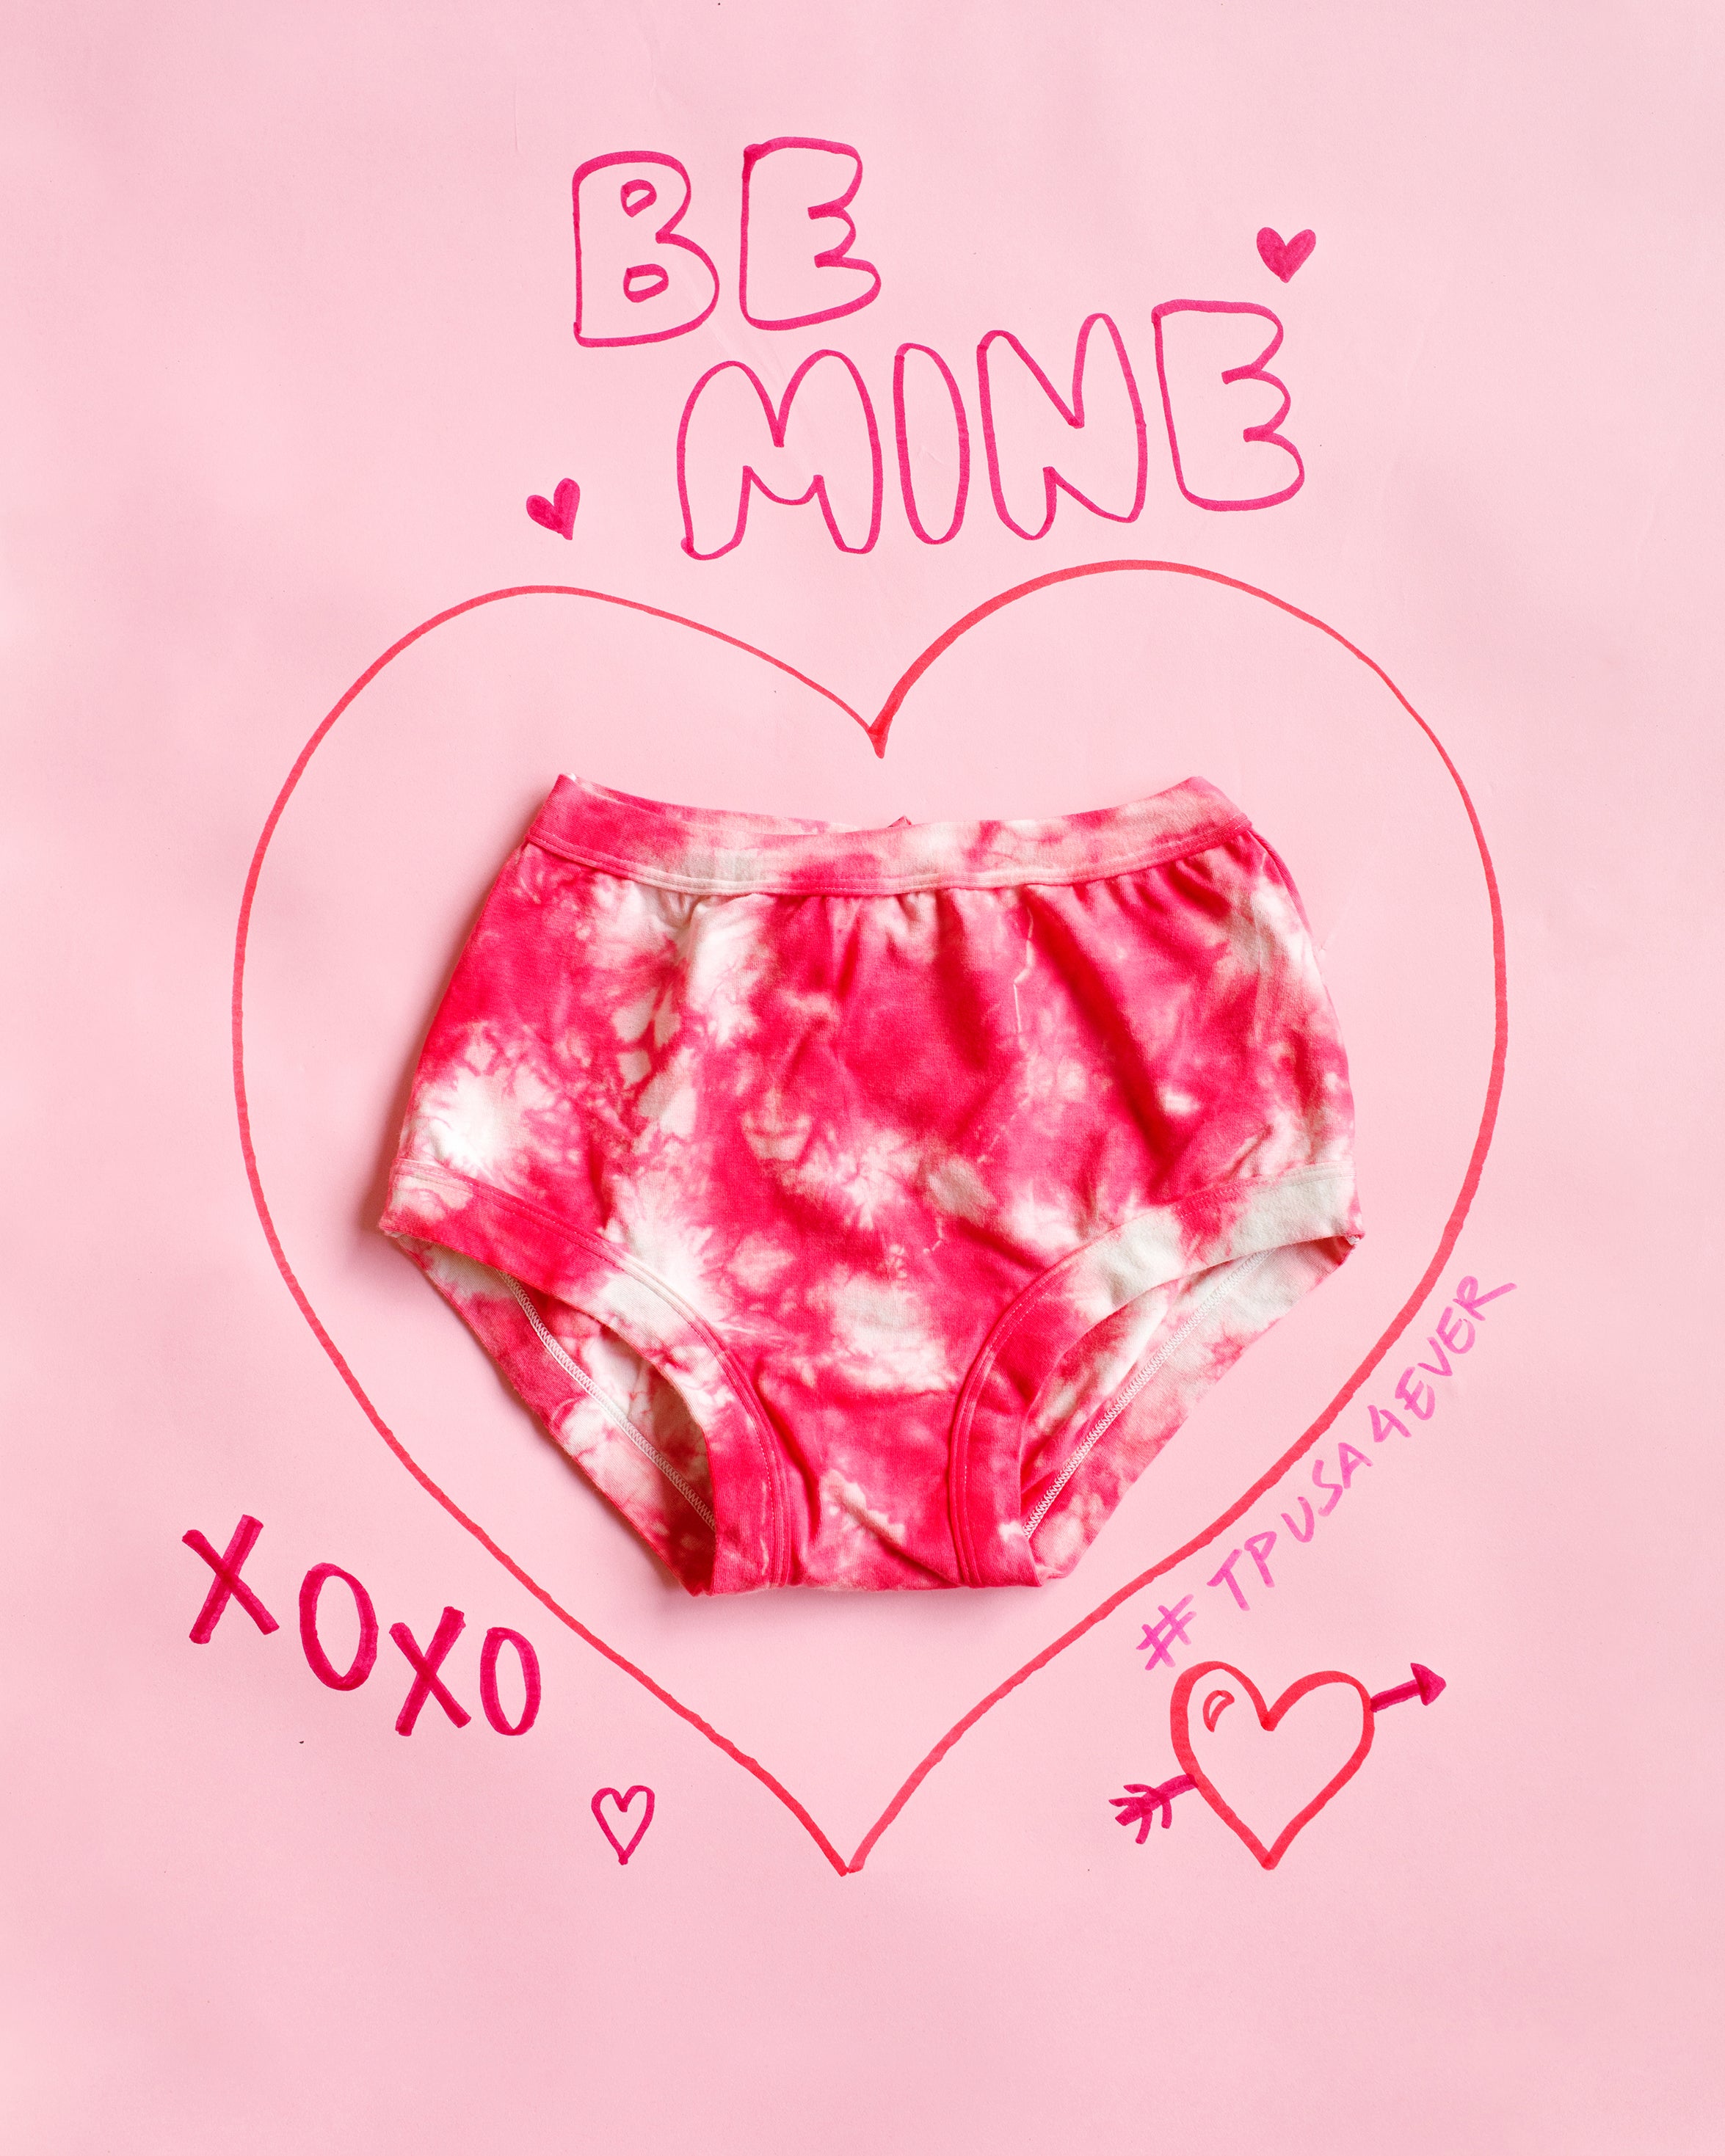 Flat lay of Thunderpants Original style underwear with red and white scrunch dye on a pink background with writing.